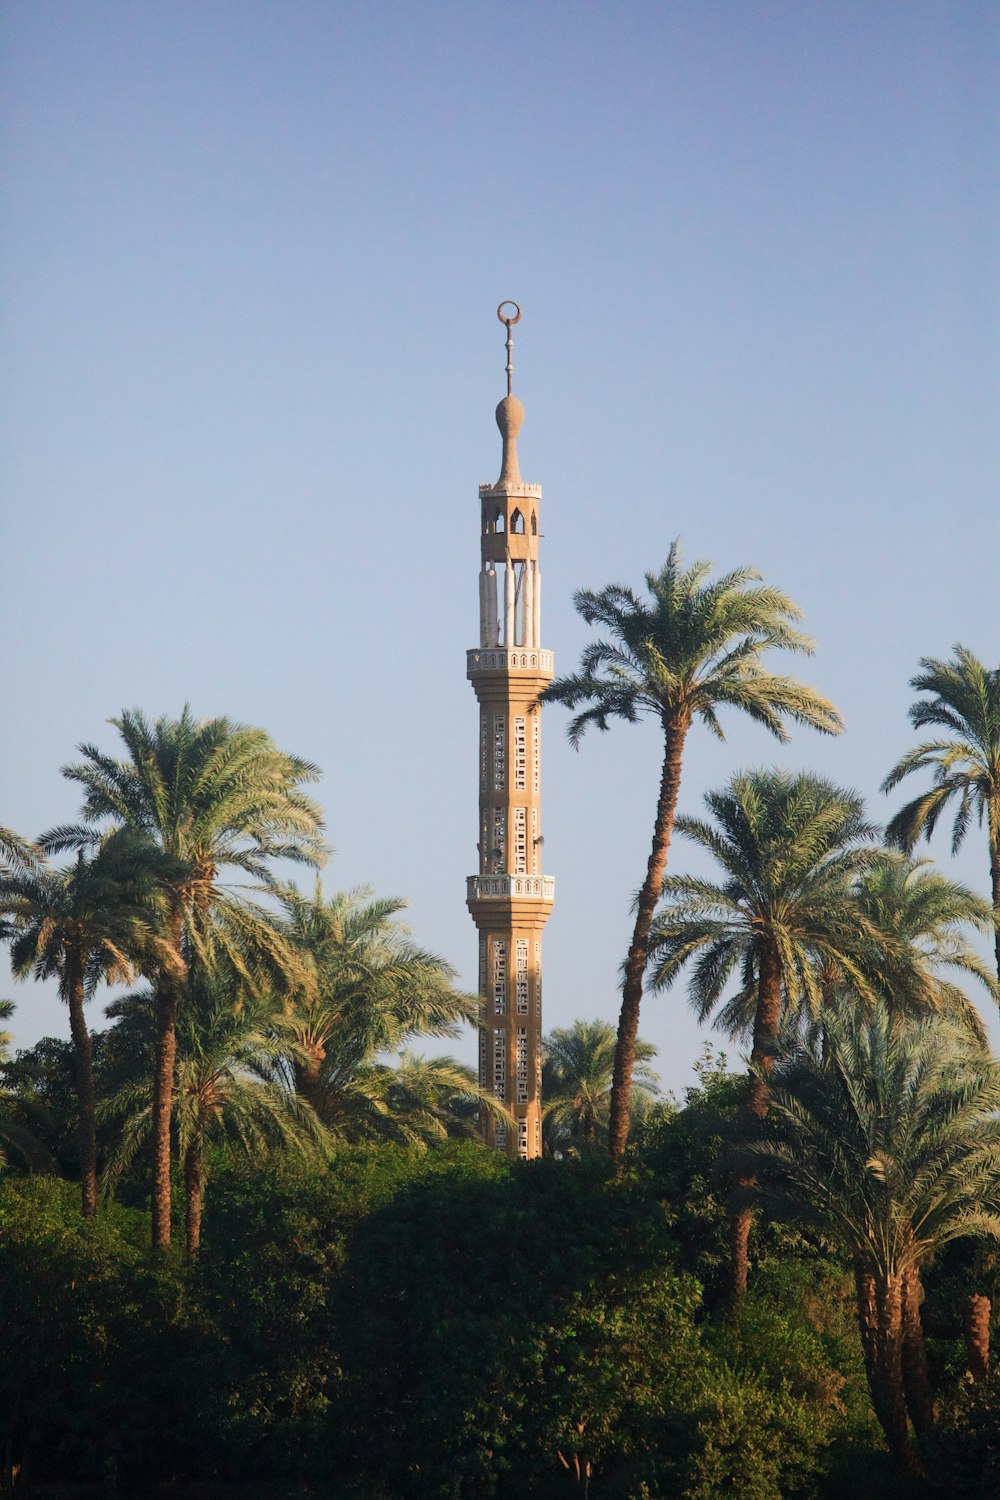 a tall tower with a clock on top surrounded by palm trees